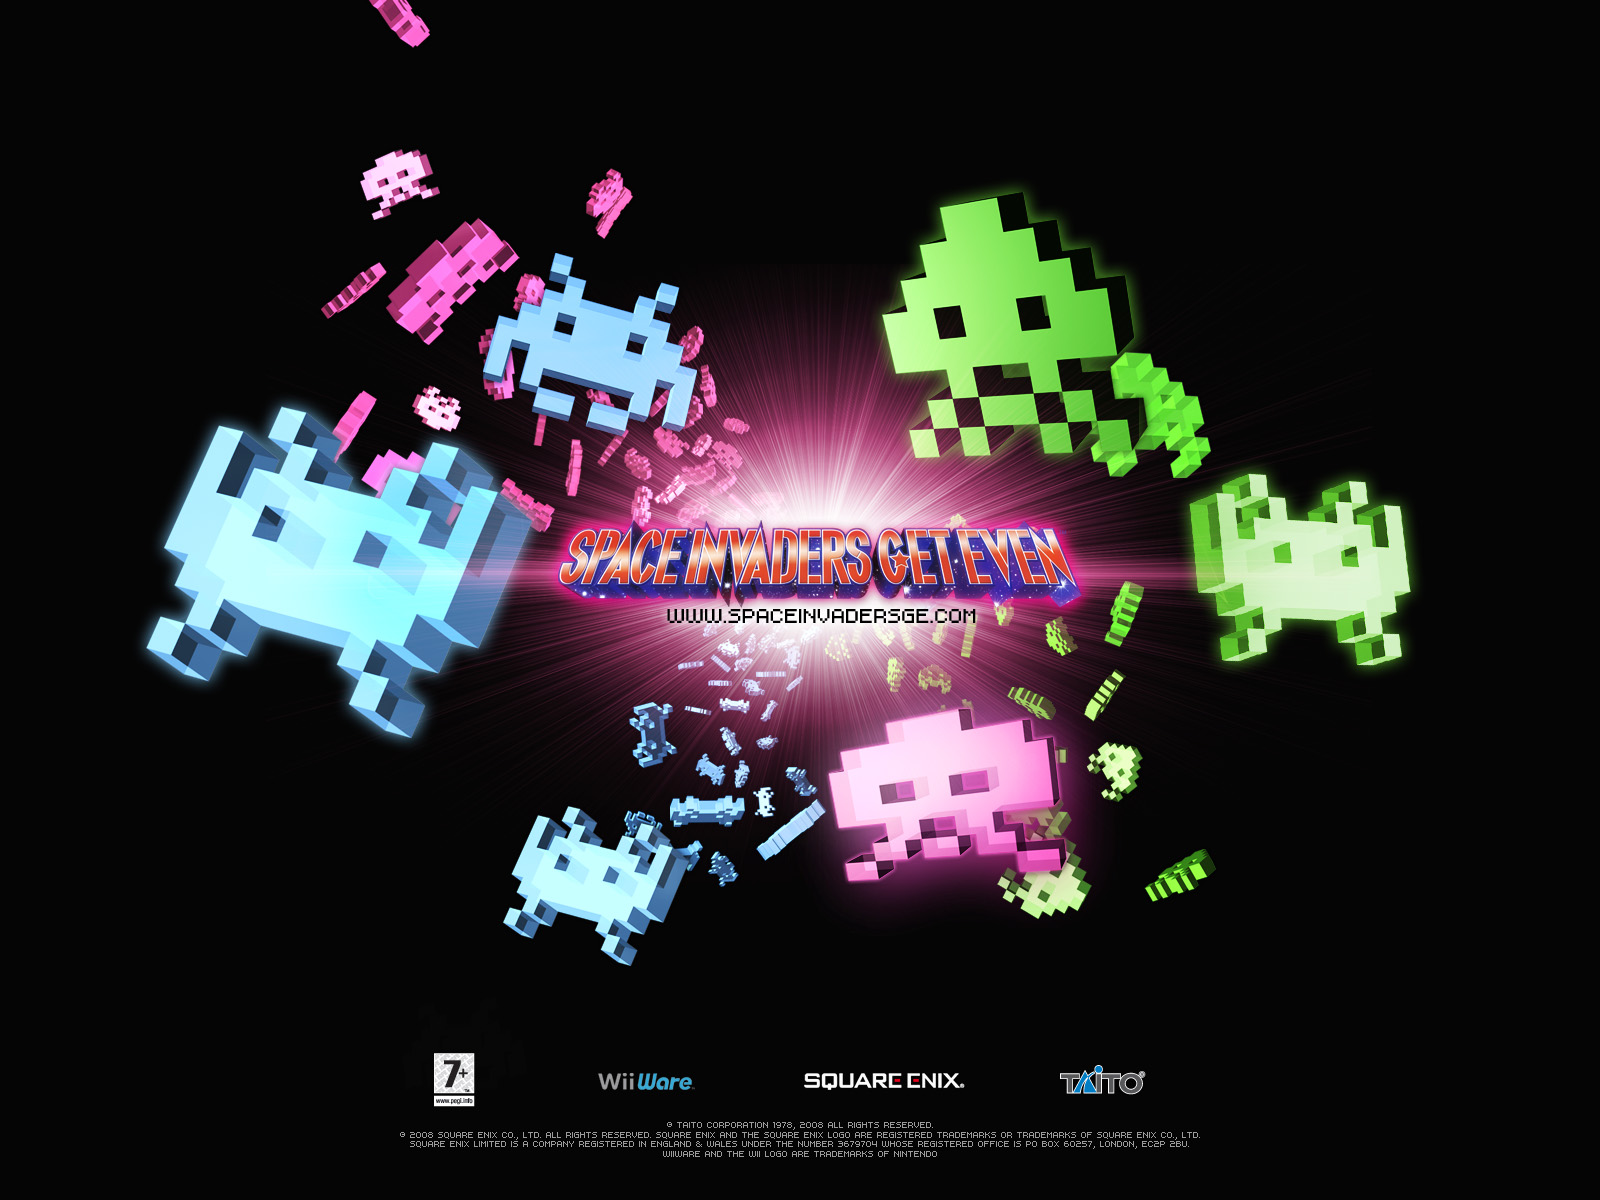 Space Invaders Get Even Wallpaper Pc Games